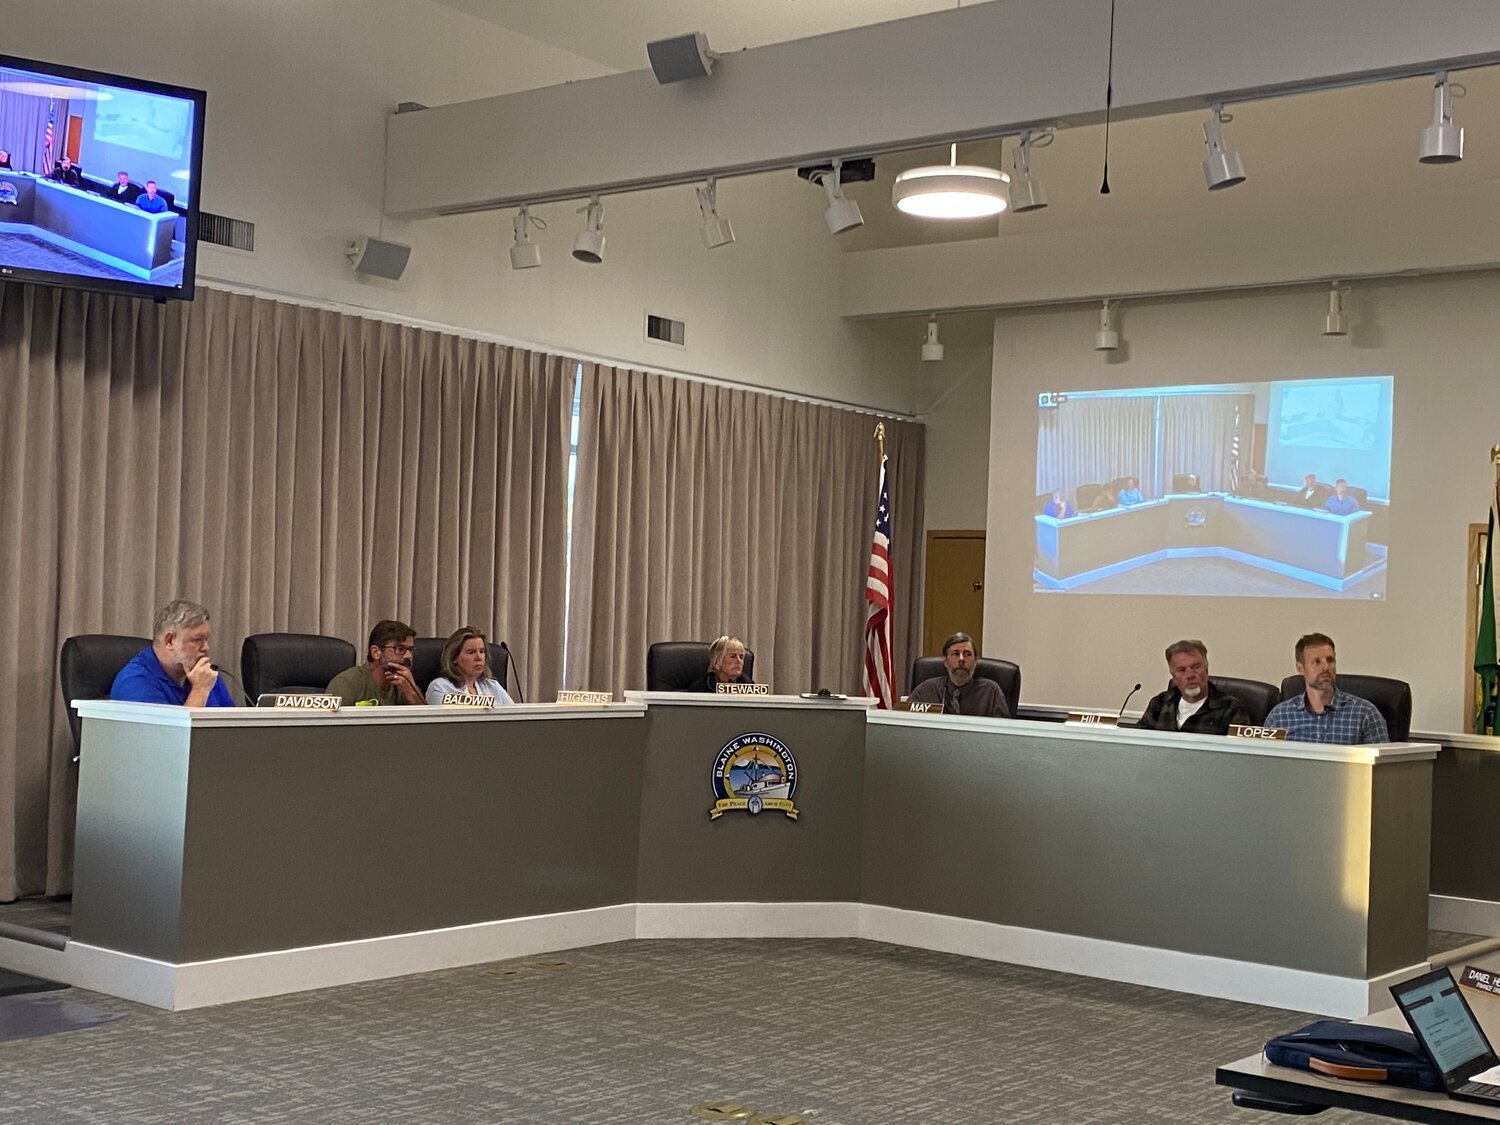 Blaine City Council during its September 11 meeting in council chambers. From l.; Eric Davidson, Garth Baldwin, Kerena Higgins, Mary Lou Steward, Richard May, Mike Hill and Rhyan Lopez.